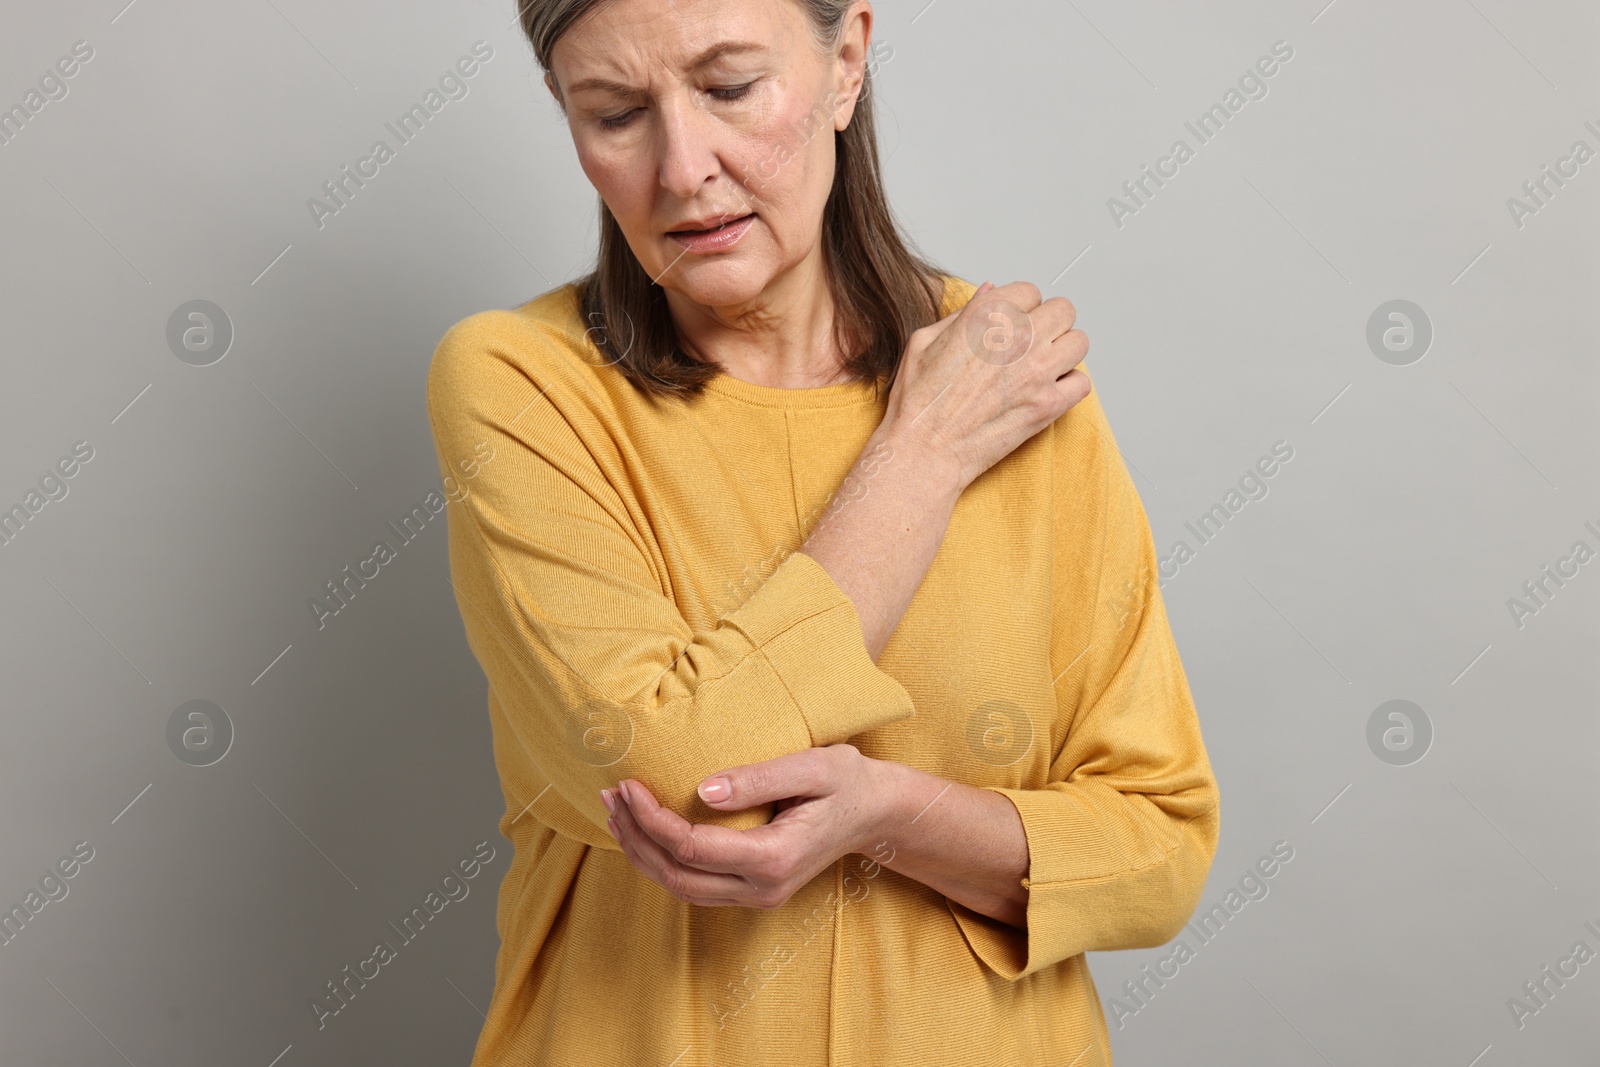 Photo of Arthritis symptoms. Woman suffering from pain in elbow on gray background